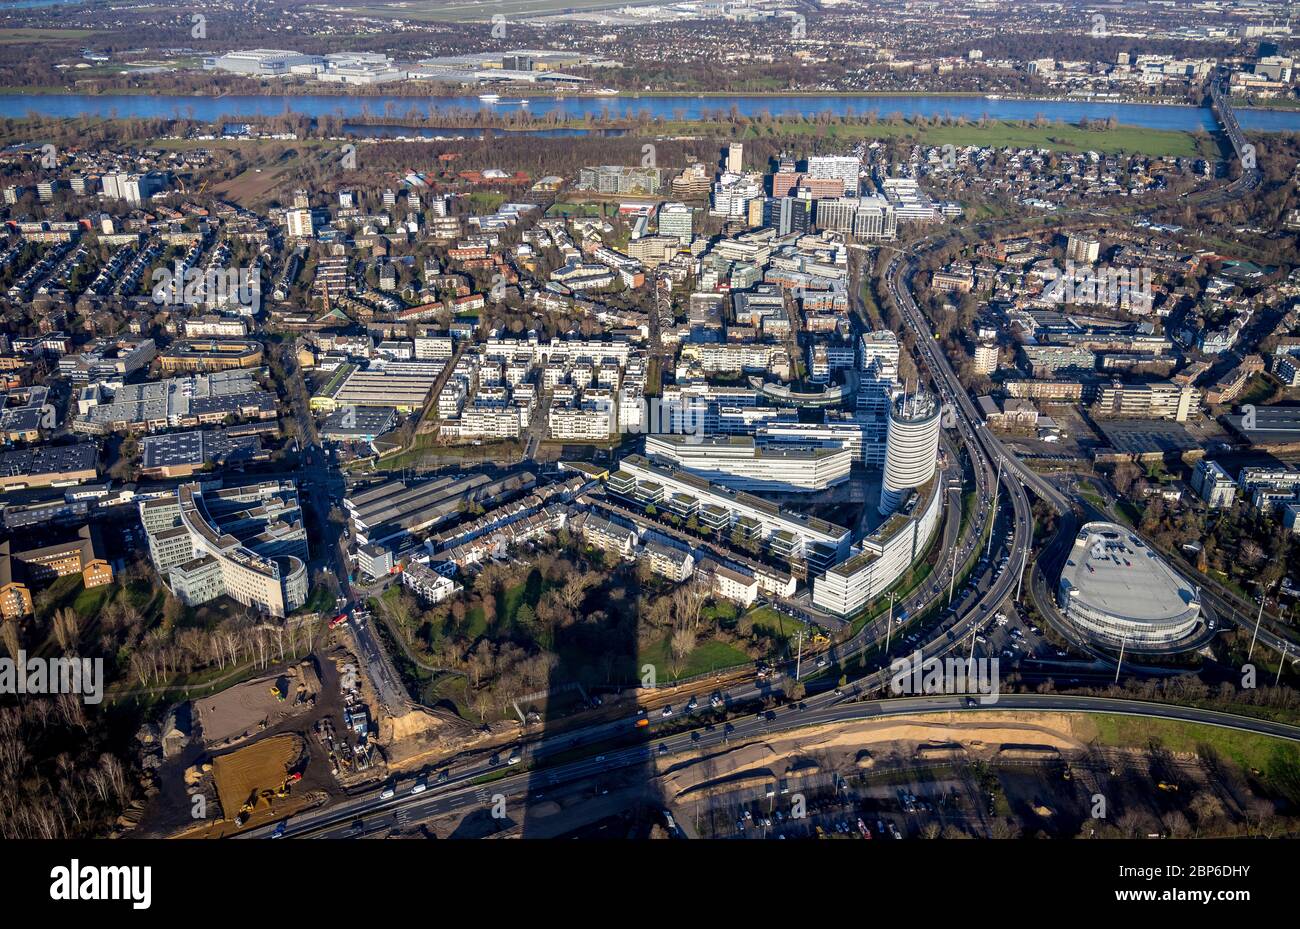 Aerial view, city view of the district of Lörick, commercial and residential buildings, Vodafone Campus Düsseldorf, River Rhine, Rhineland, North Rhine-Westphalia, Germany Stock Photo